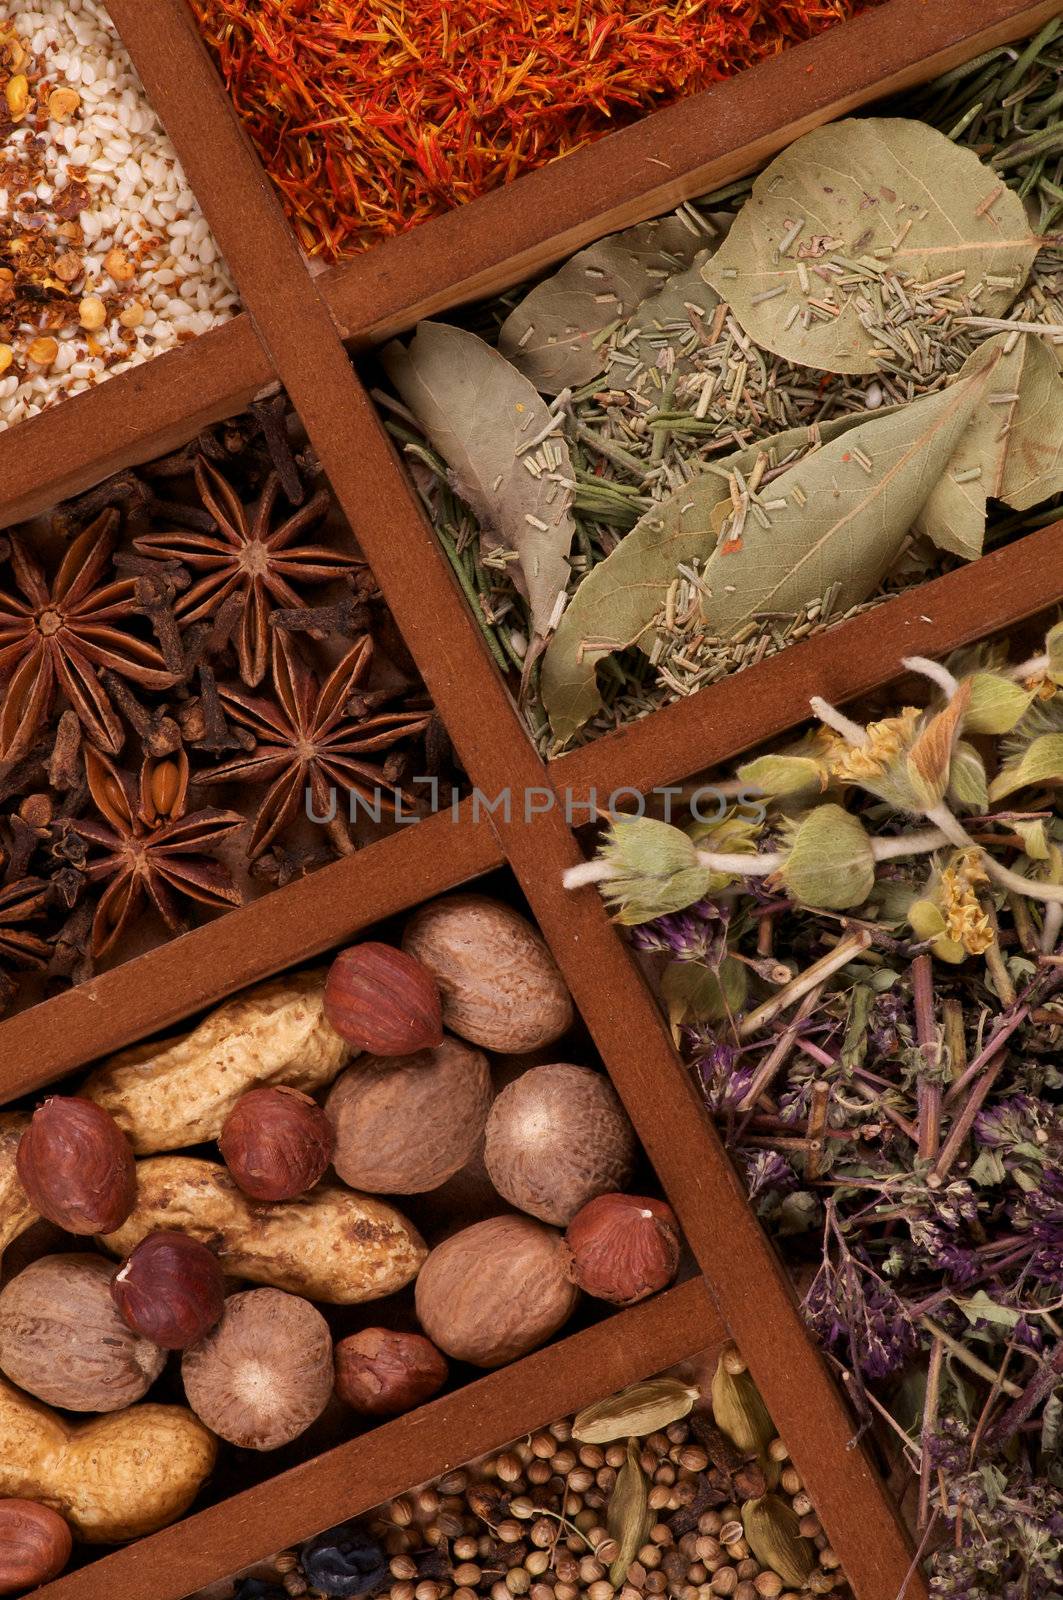 Wooden Box with Mixed Spicy Spices, Herbs and Dried Leafs close up